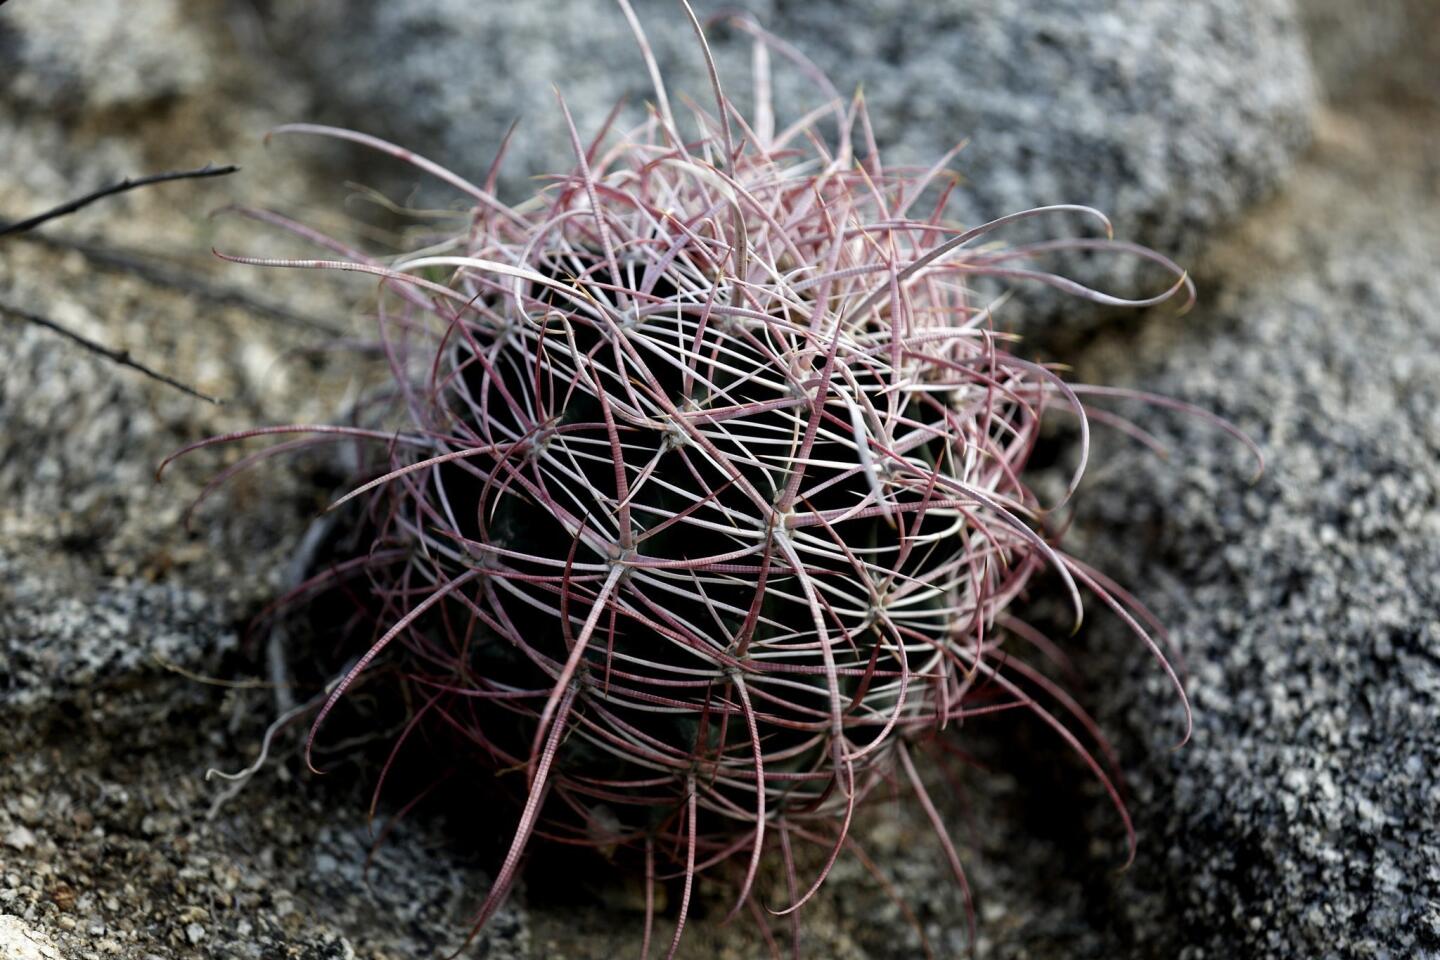 The barrel cactus (ferocactus cylindraceus) isn't a wildflower, but is a happy member of the plant community in Glorietta Canyon in Anza-Borrego Desert State Park.